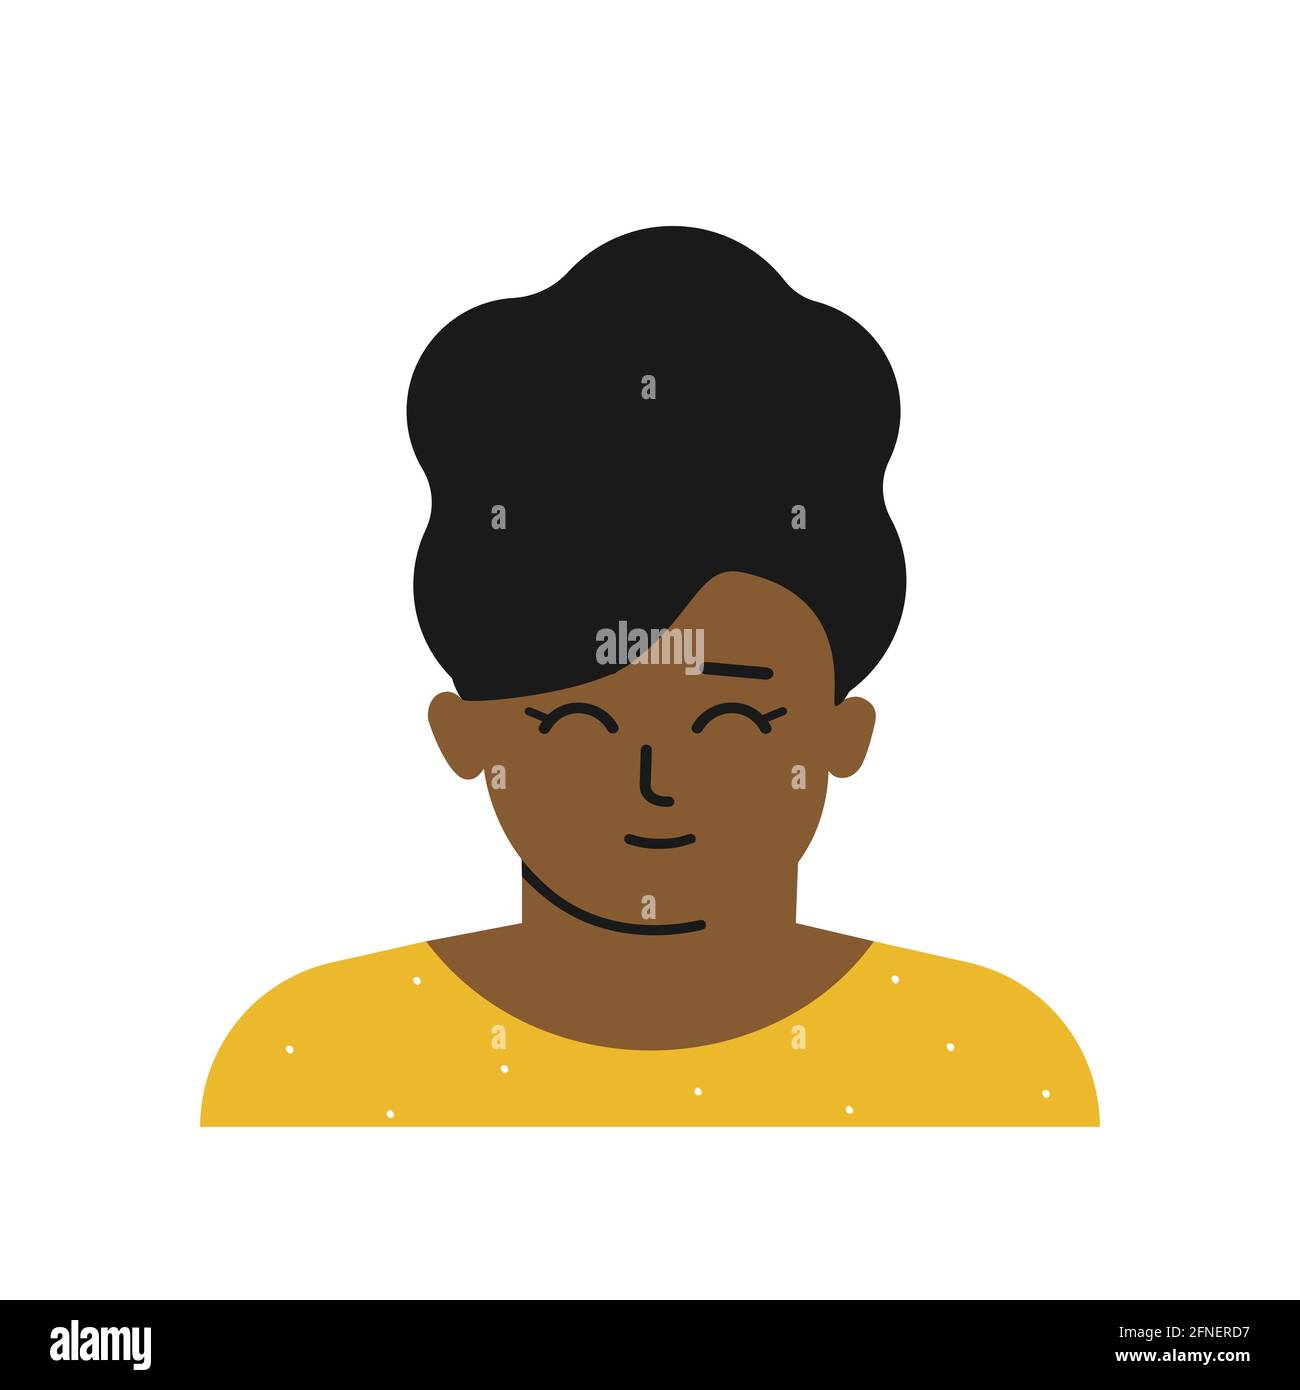 Vector flat isolated illustration with portrait of cartoon character. Avatar of little African american girl with brunette curly hair, dark skin. Cute Stock Vector